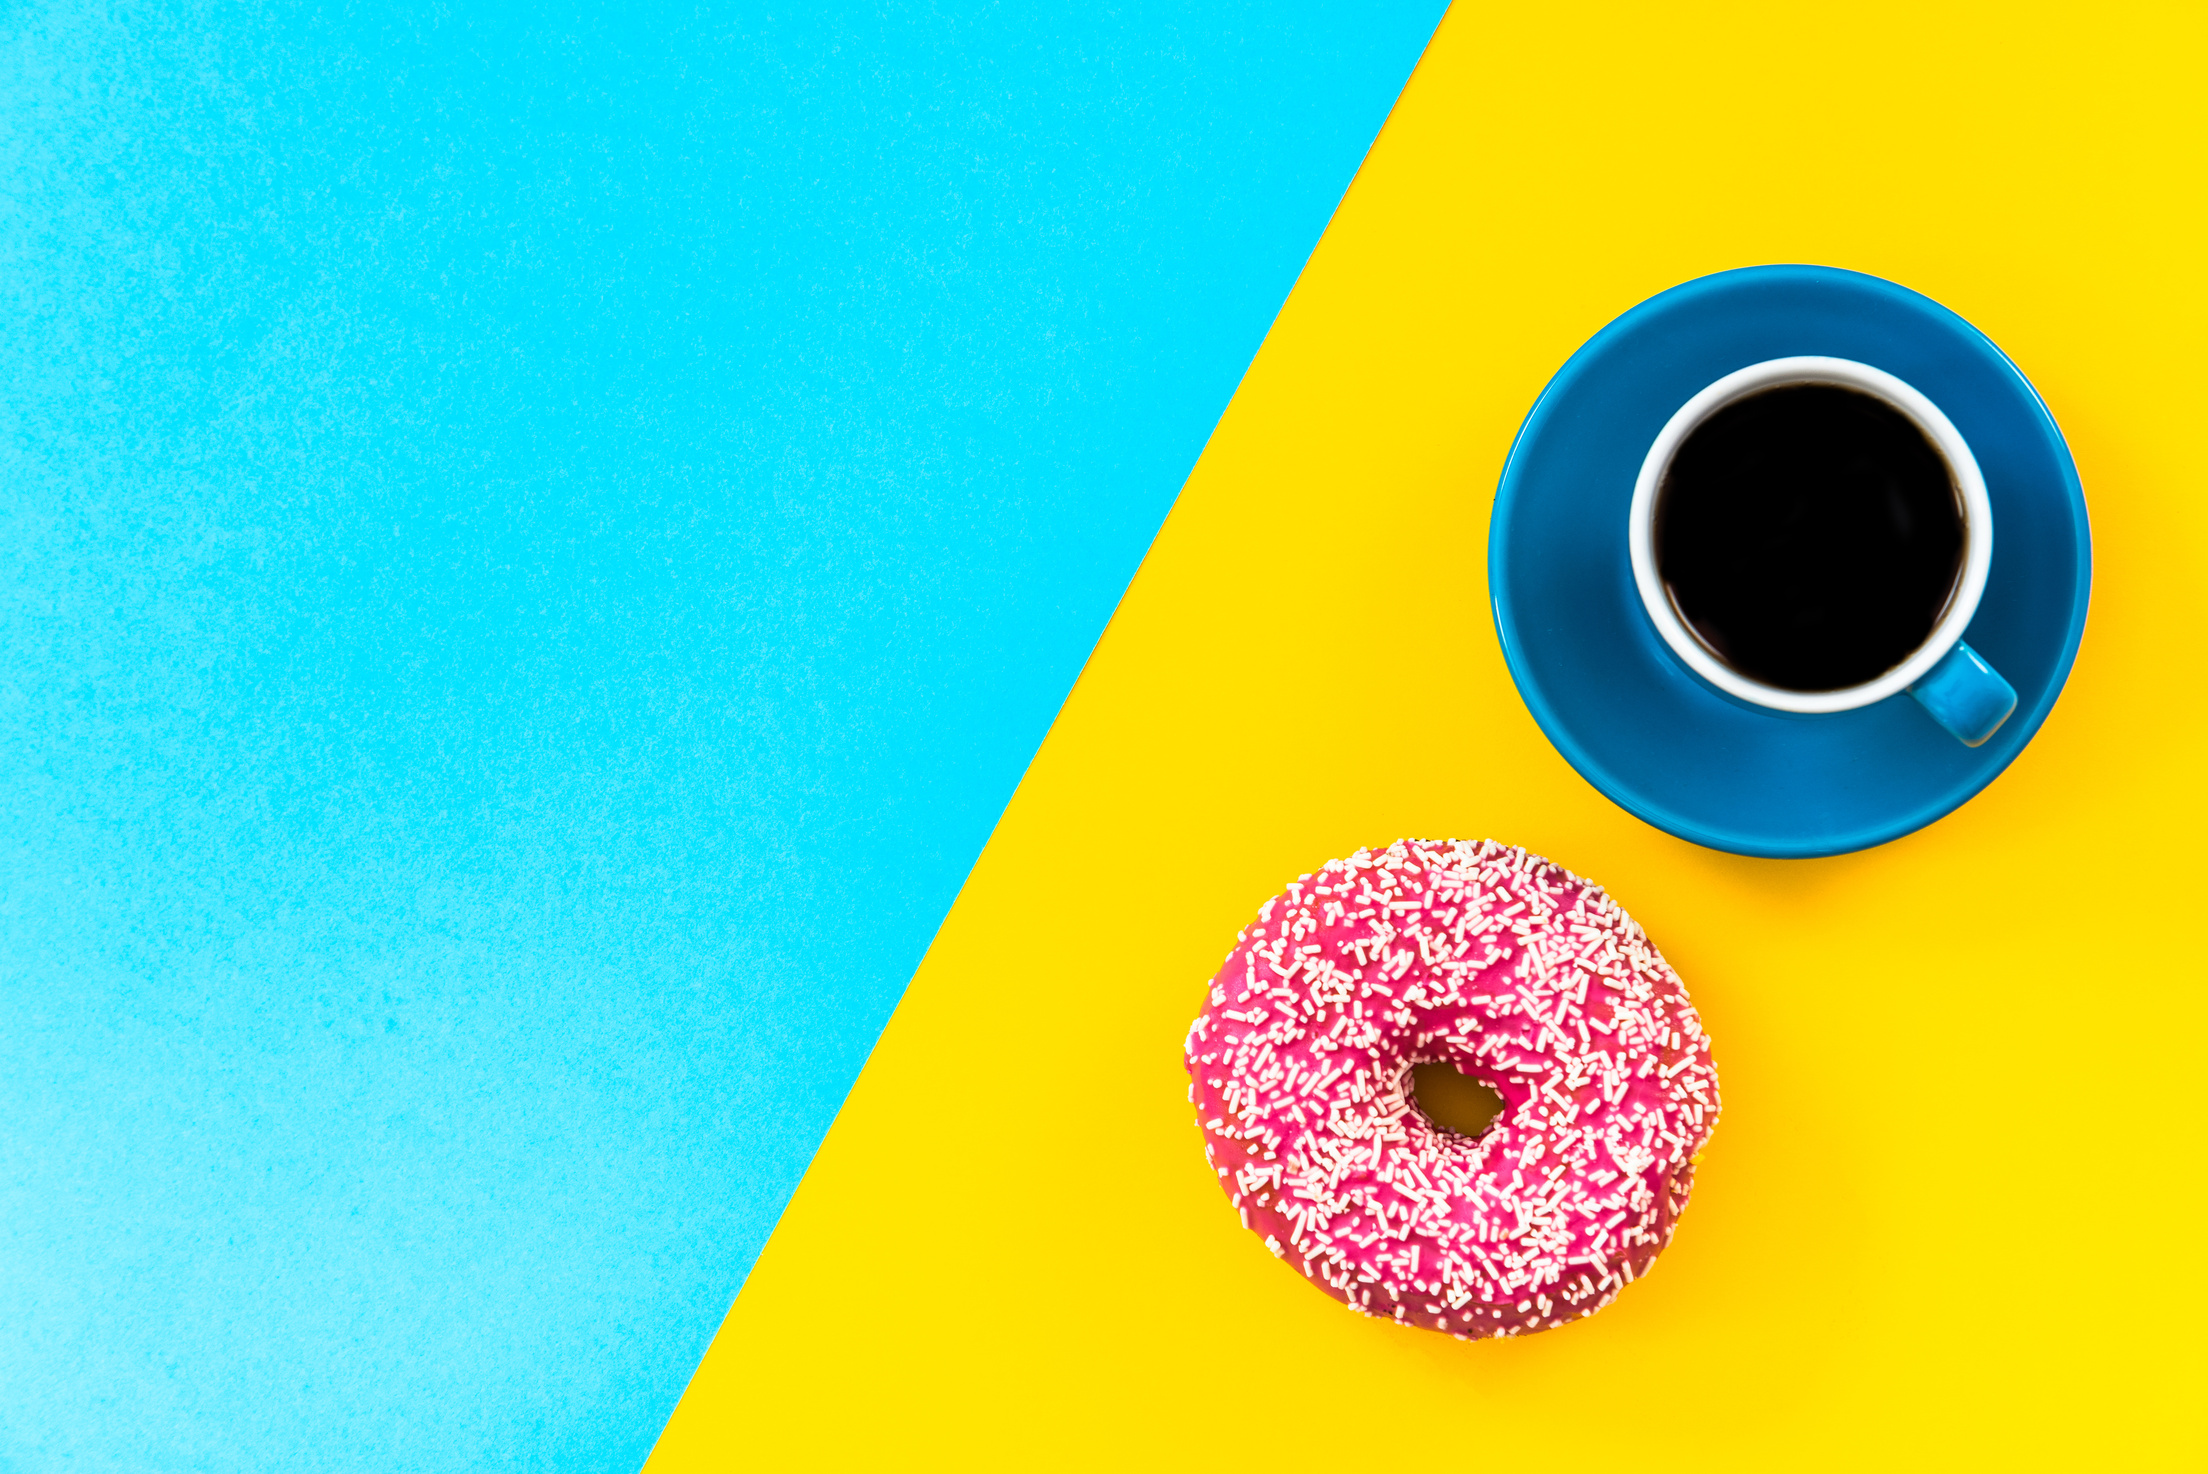 Coffee and donut on bright background